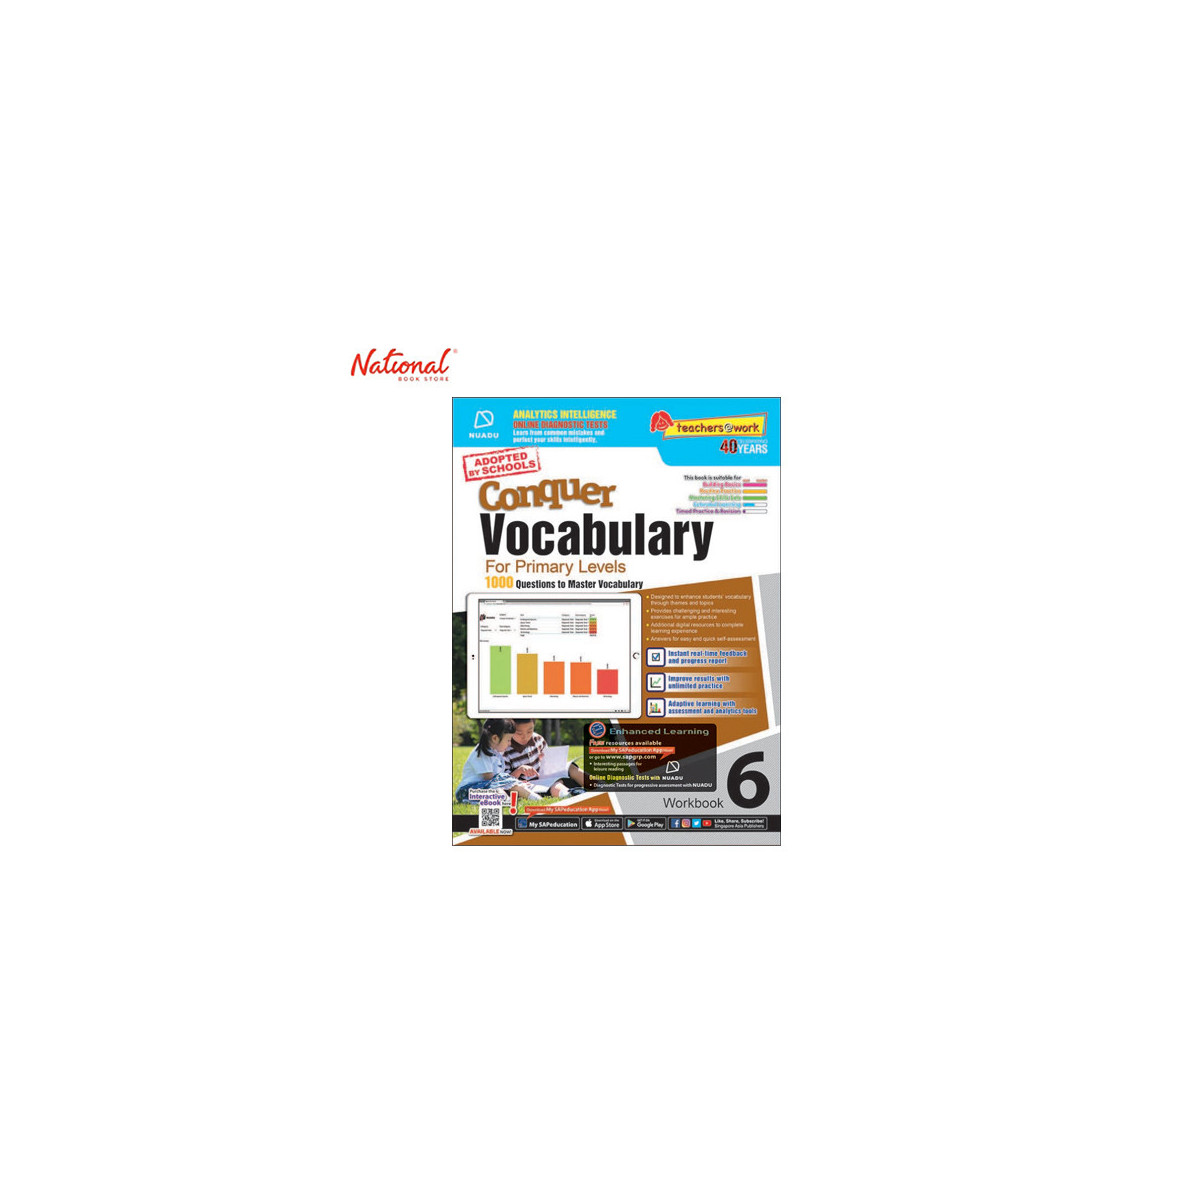 Conquer Vocabulary For Primary Levels Workbook 6 + Nuadu Tradepaper by Lee J.